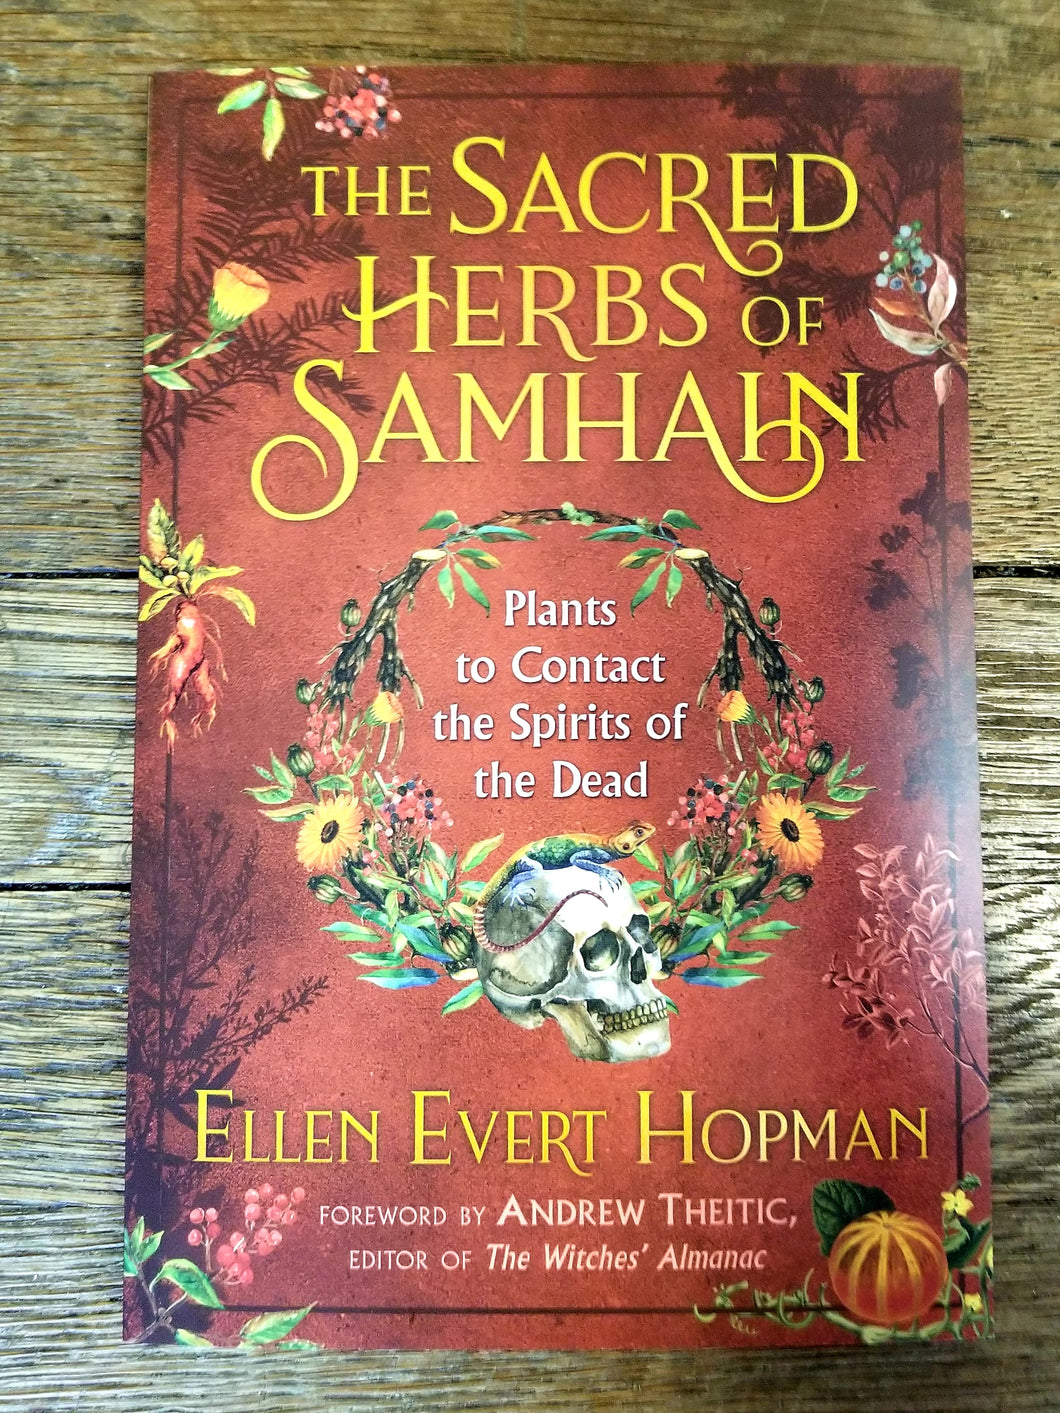 The Sacred Herbs of Samhain: Plants to Contact the Spirits of the Dead by Ellen Evert Hopman and Andrew Theitic